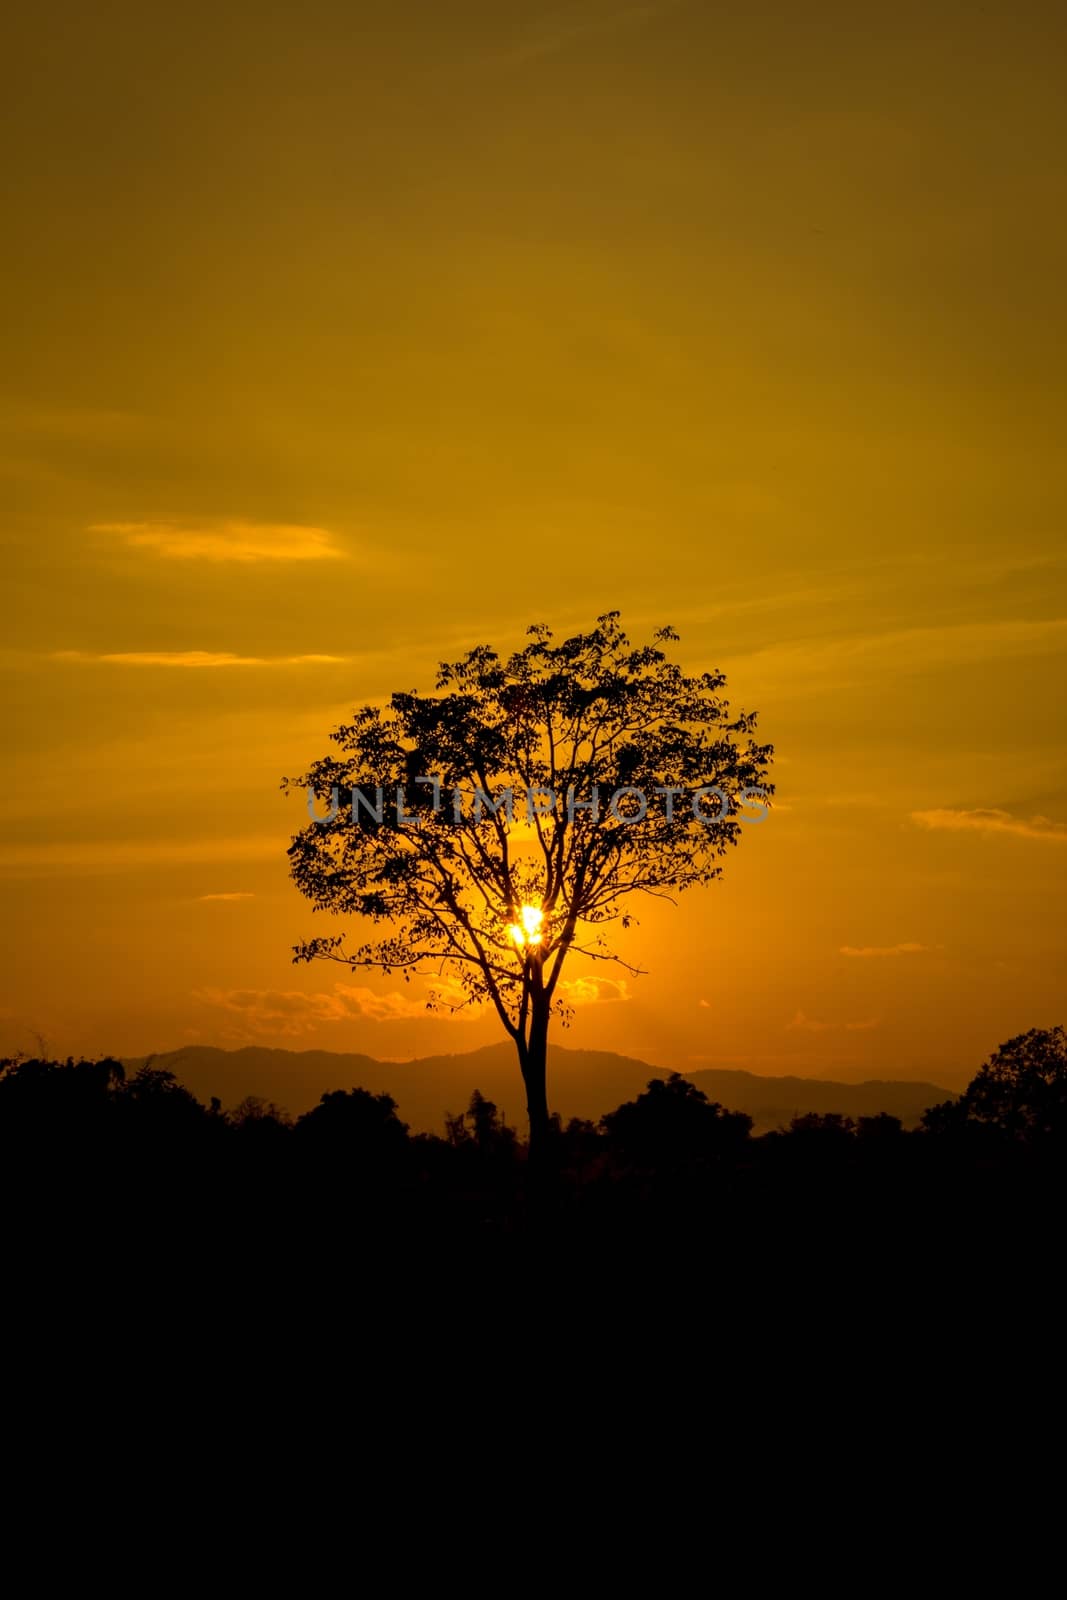 Beautiful landscape image with sun and trees silhouette at sunse by a3701027